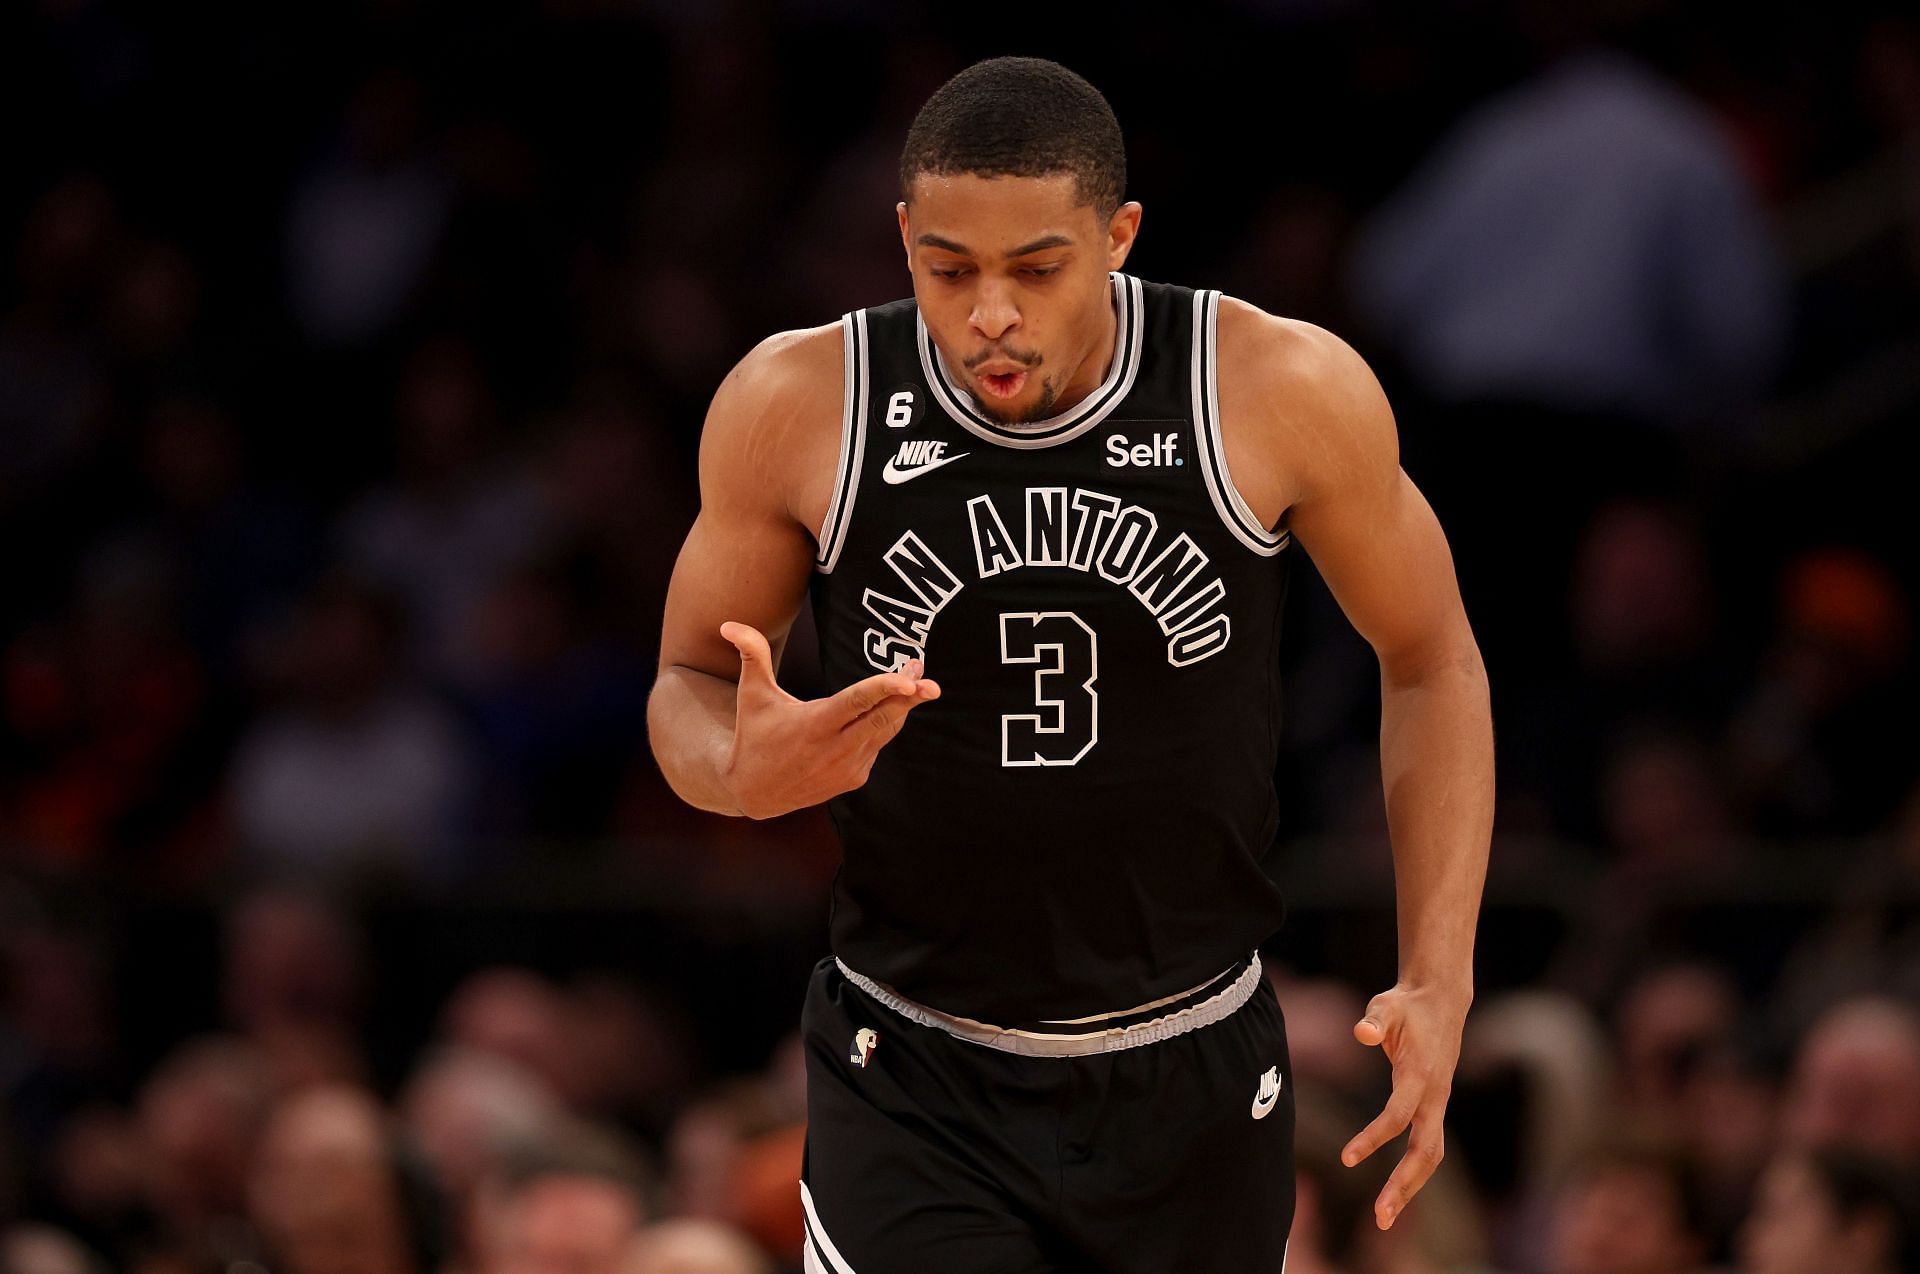 The 2022 San Antonio Spurs Starting Point Guard Is …